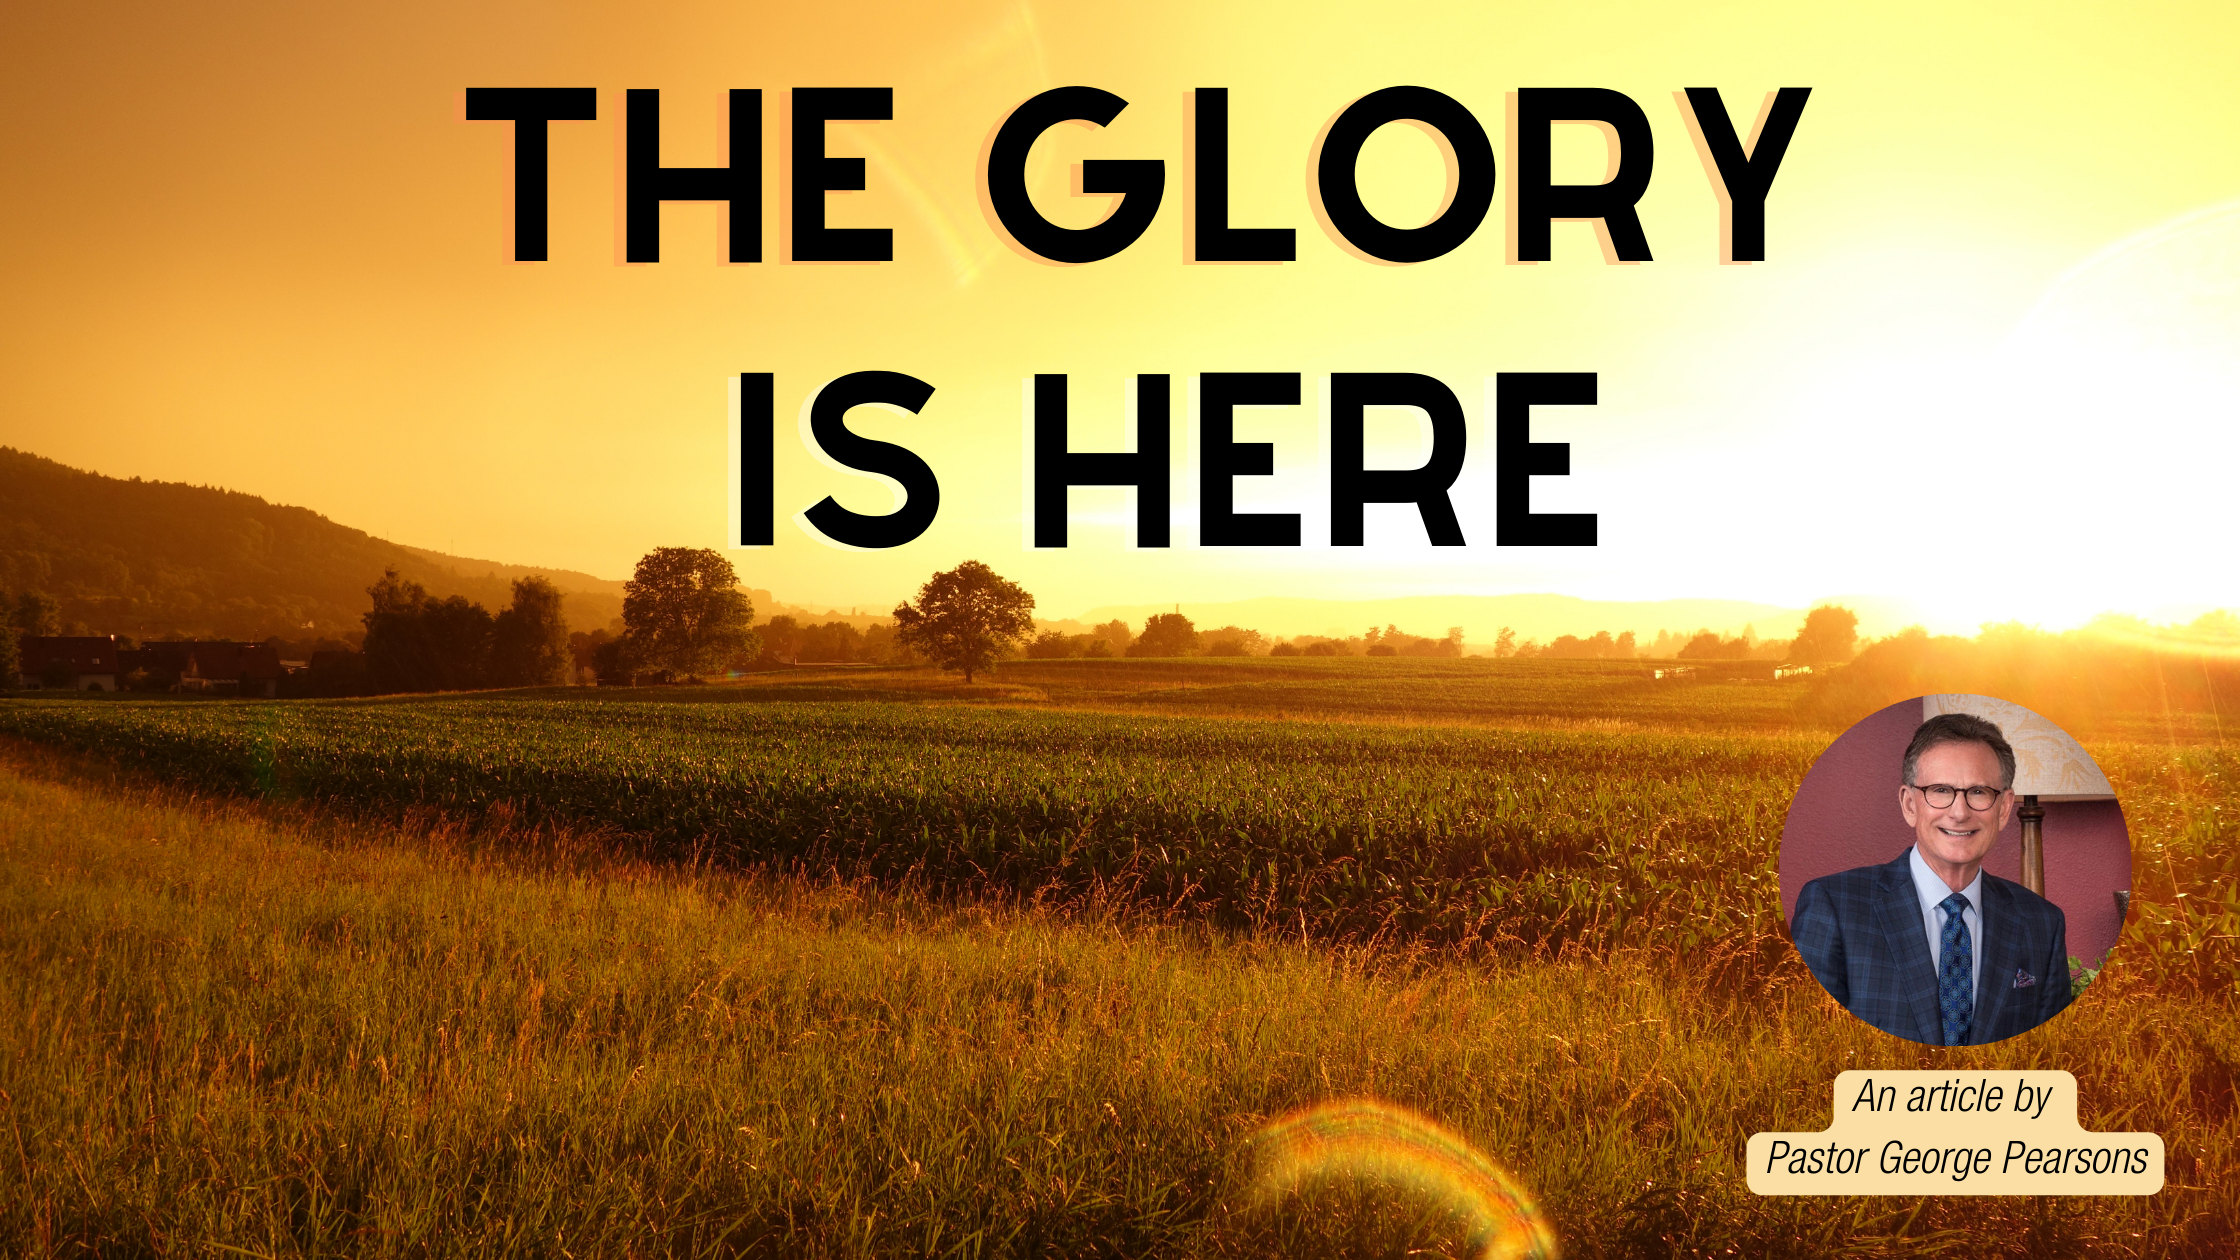 The Glory is Here - an article by Pastor George